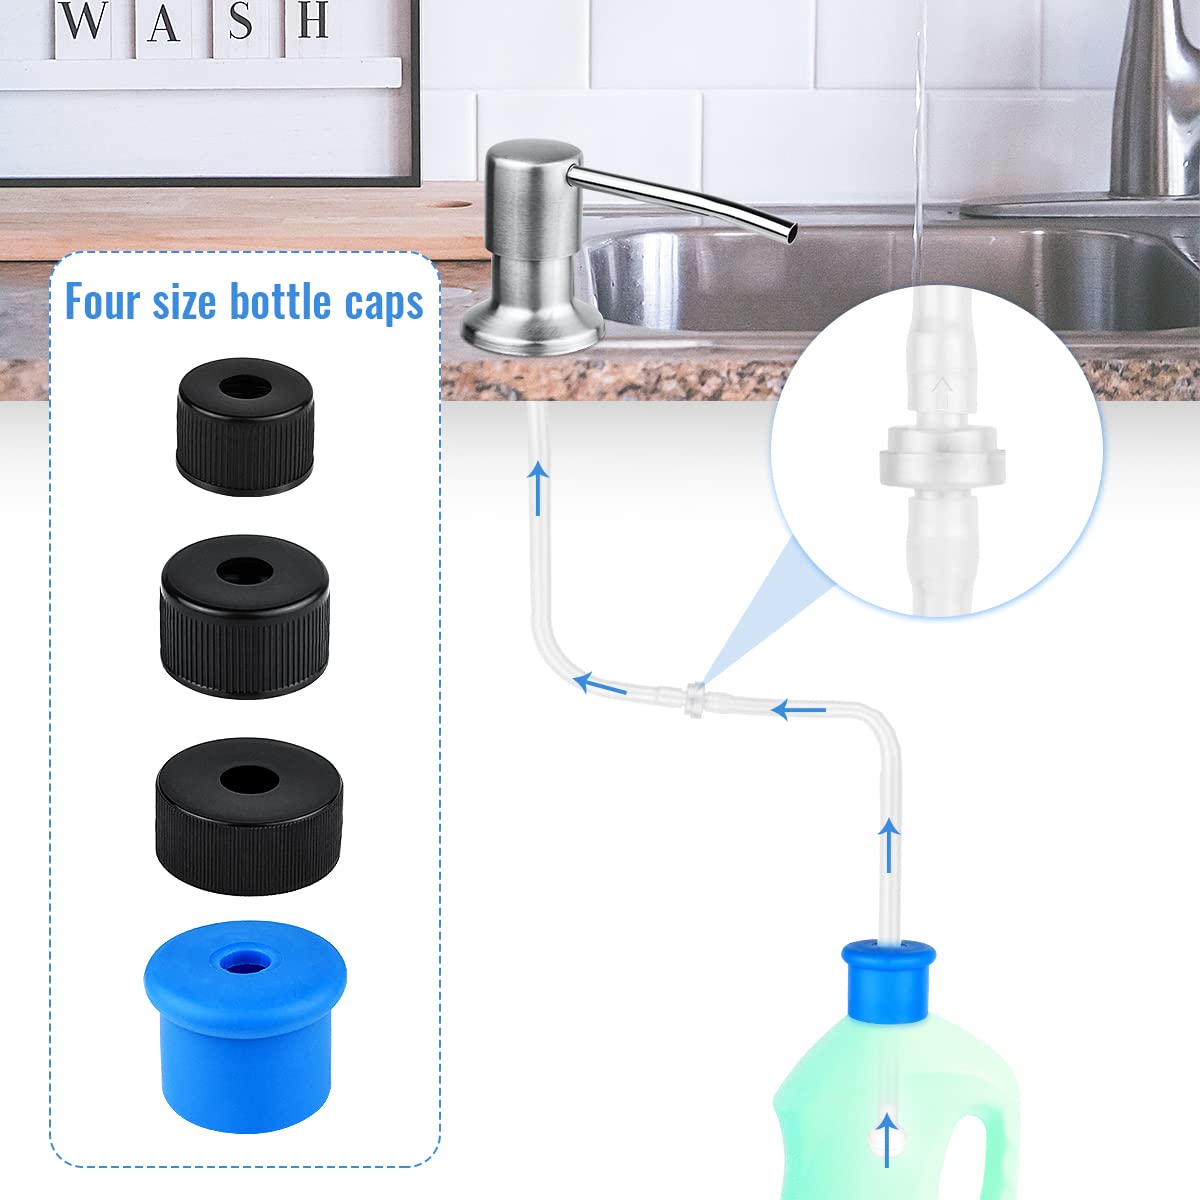 1 Pcs Dish Soap Dispenser for Kitchen Sink, Built in Soap Dispenser Countertop Pump Head with 49 in Extension Tube fit Kitchen Bathroom